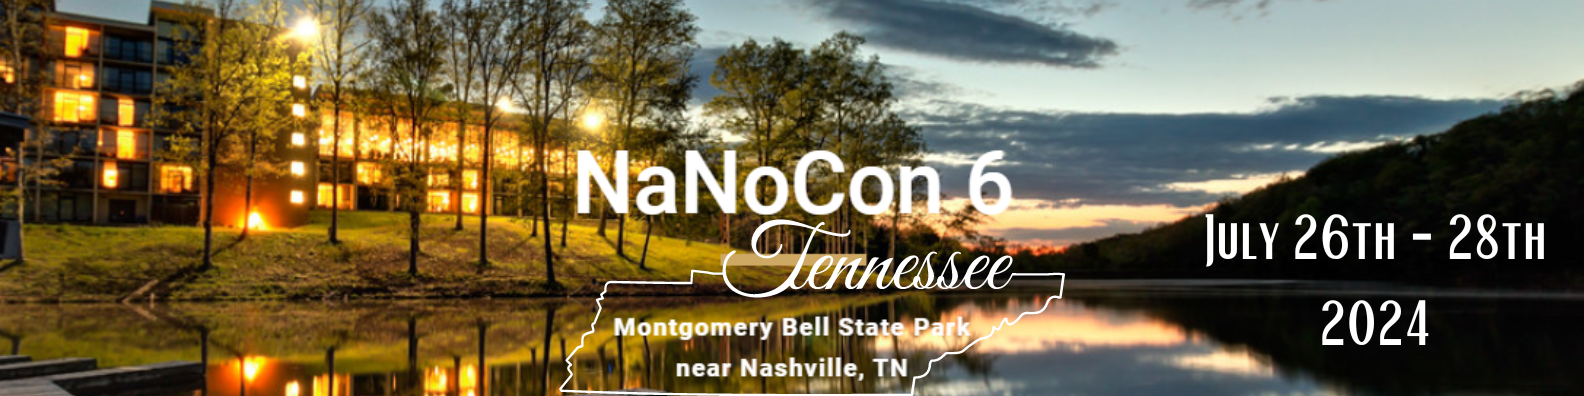 NaNoCon is a gathering for non-religious people in the South